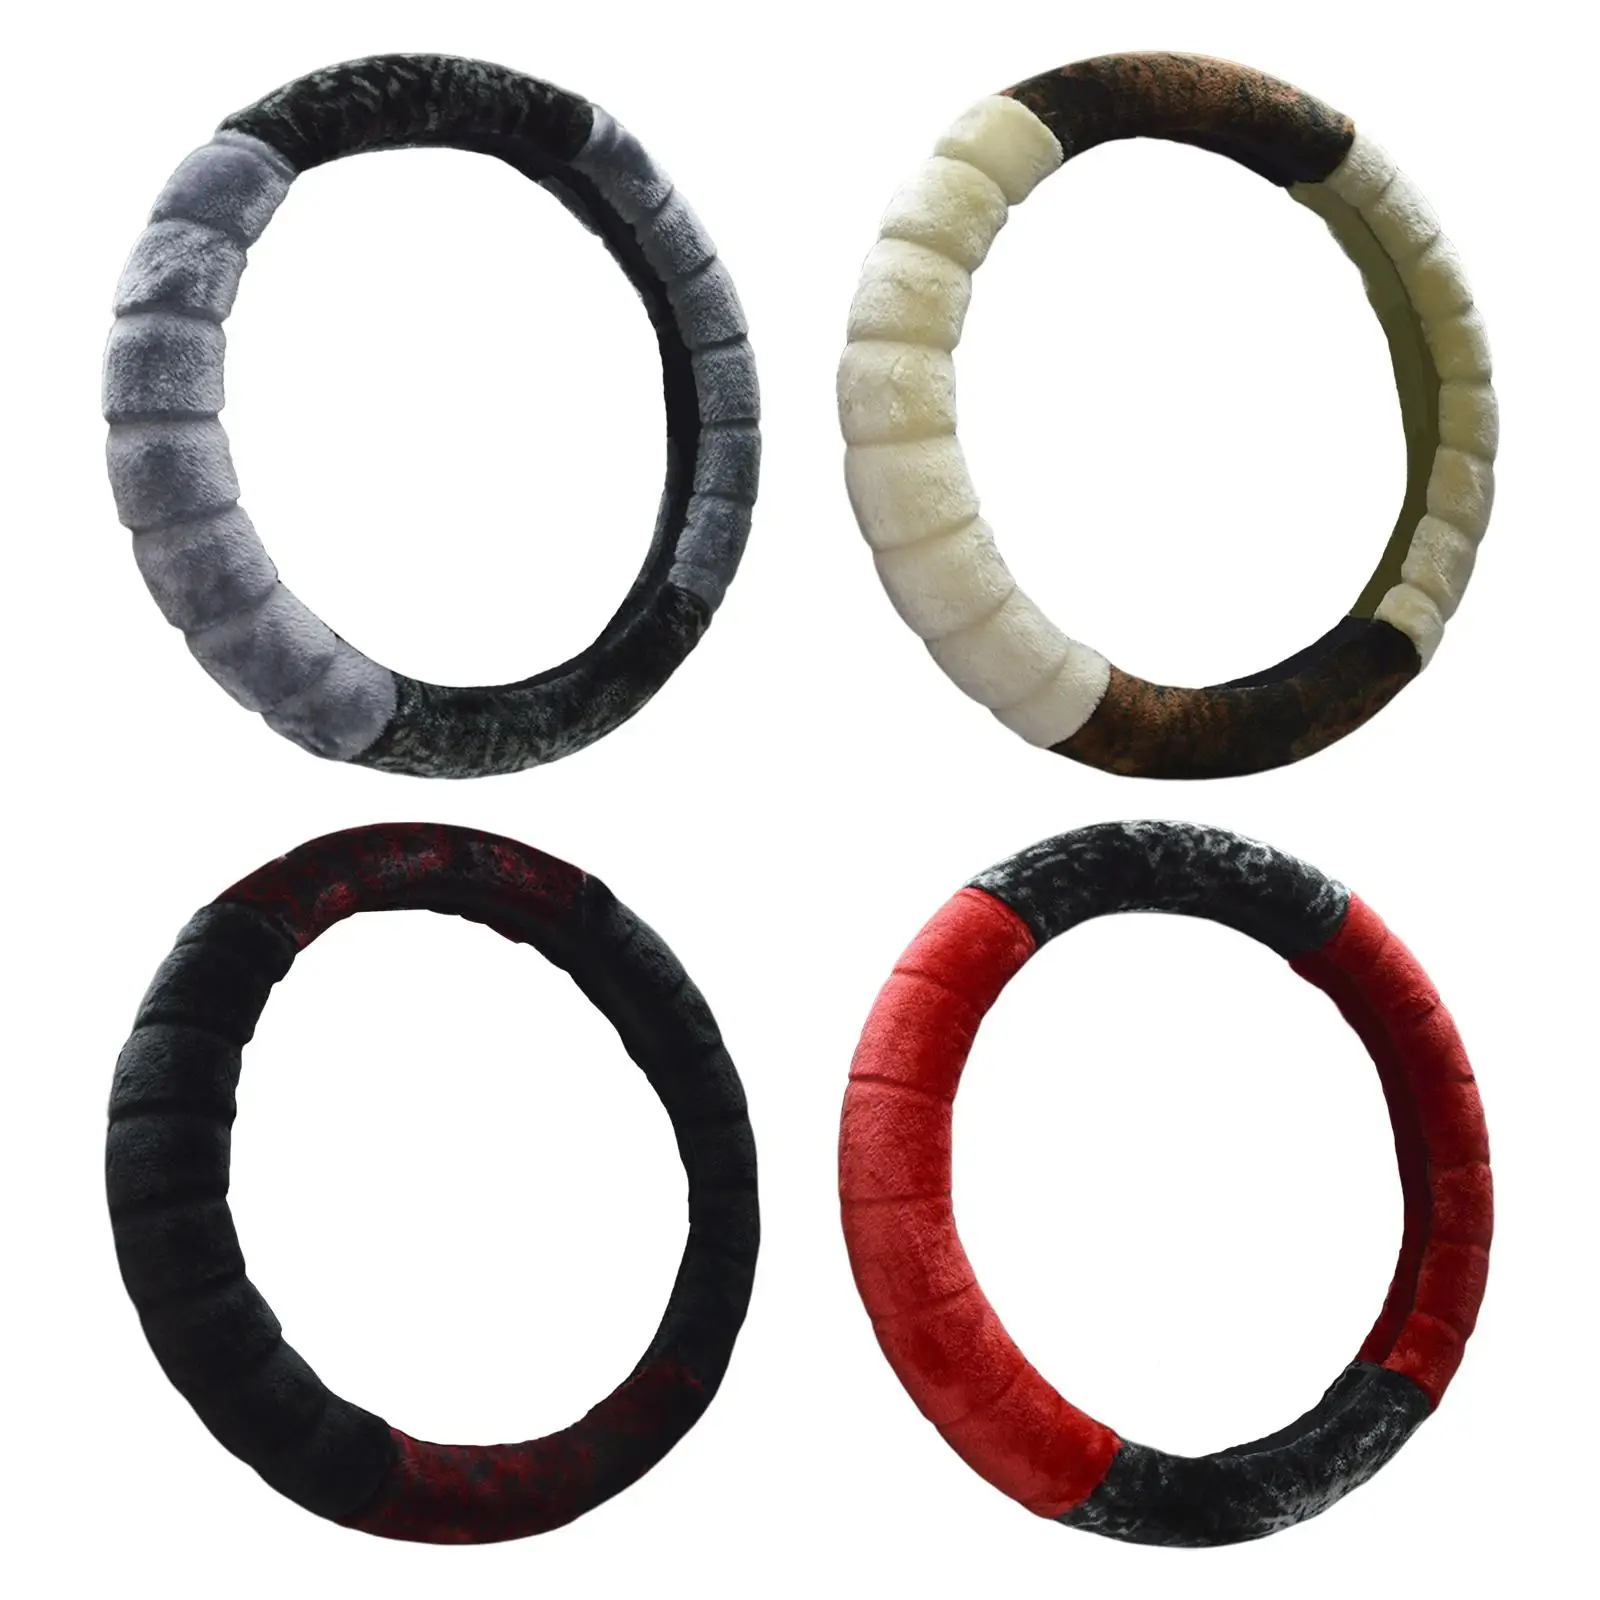 Car Steering Wheel Cover Universal 38cm Accessories Soft Plush Car Parts Classic Protector Anti-Slip for Winter Warm